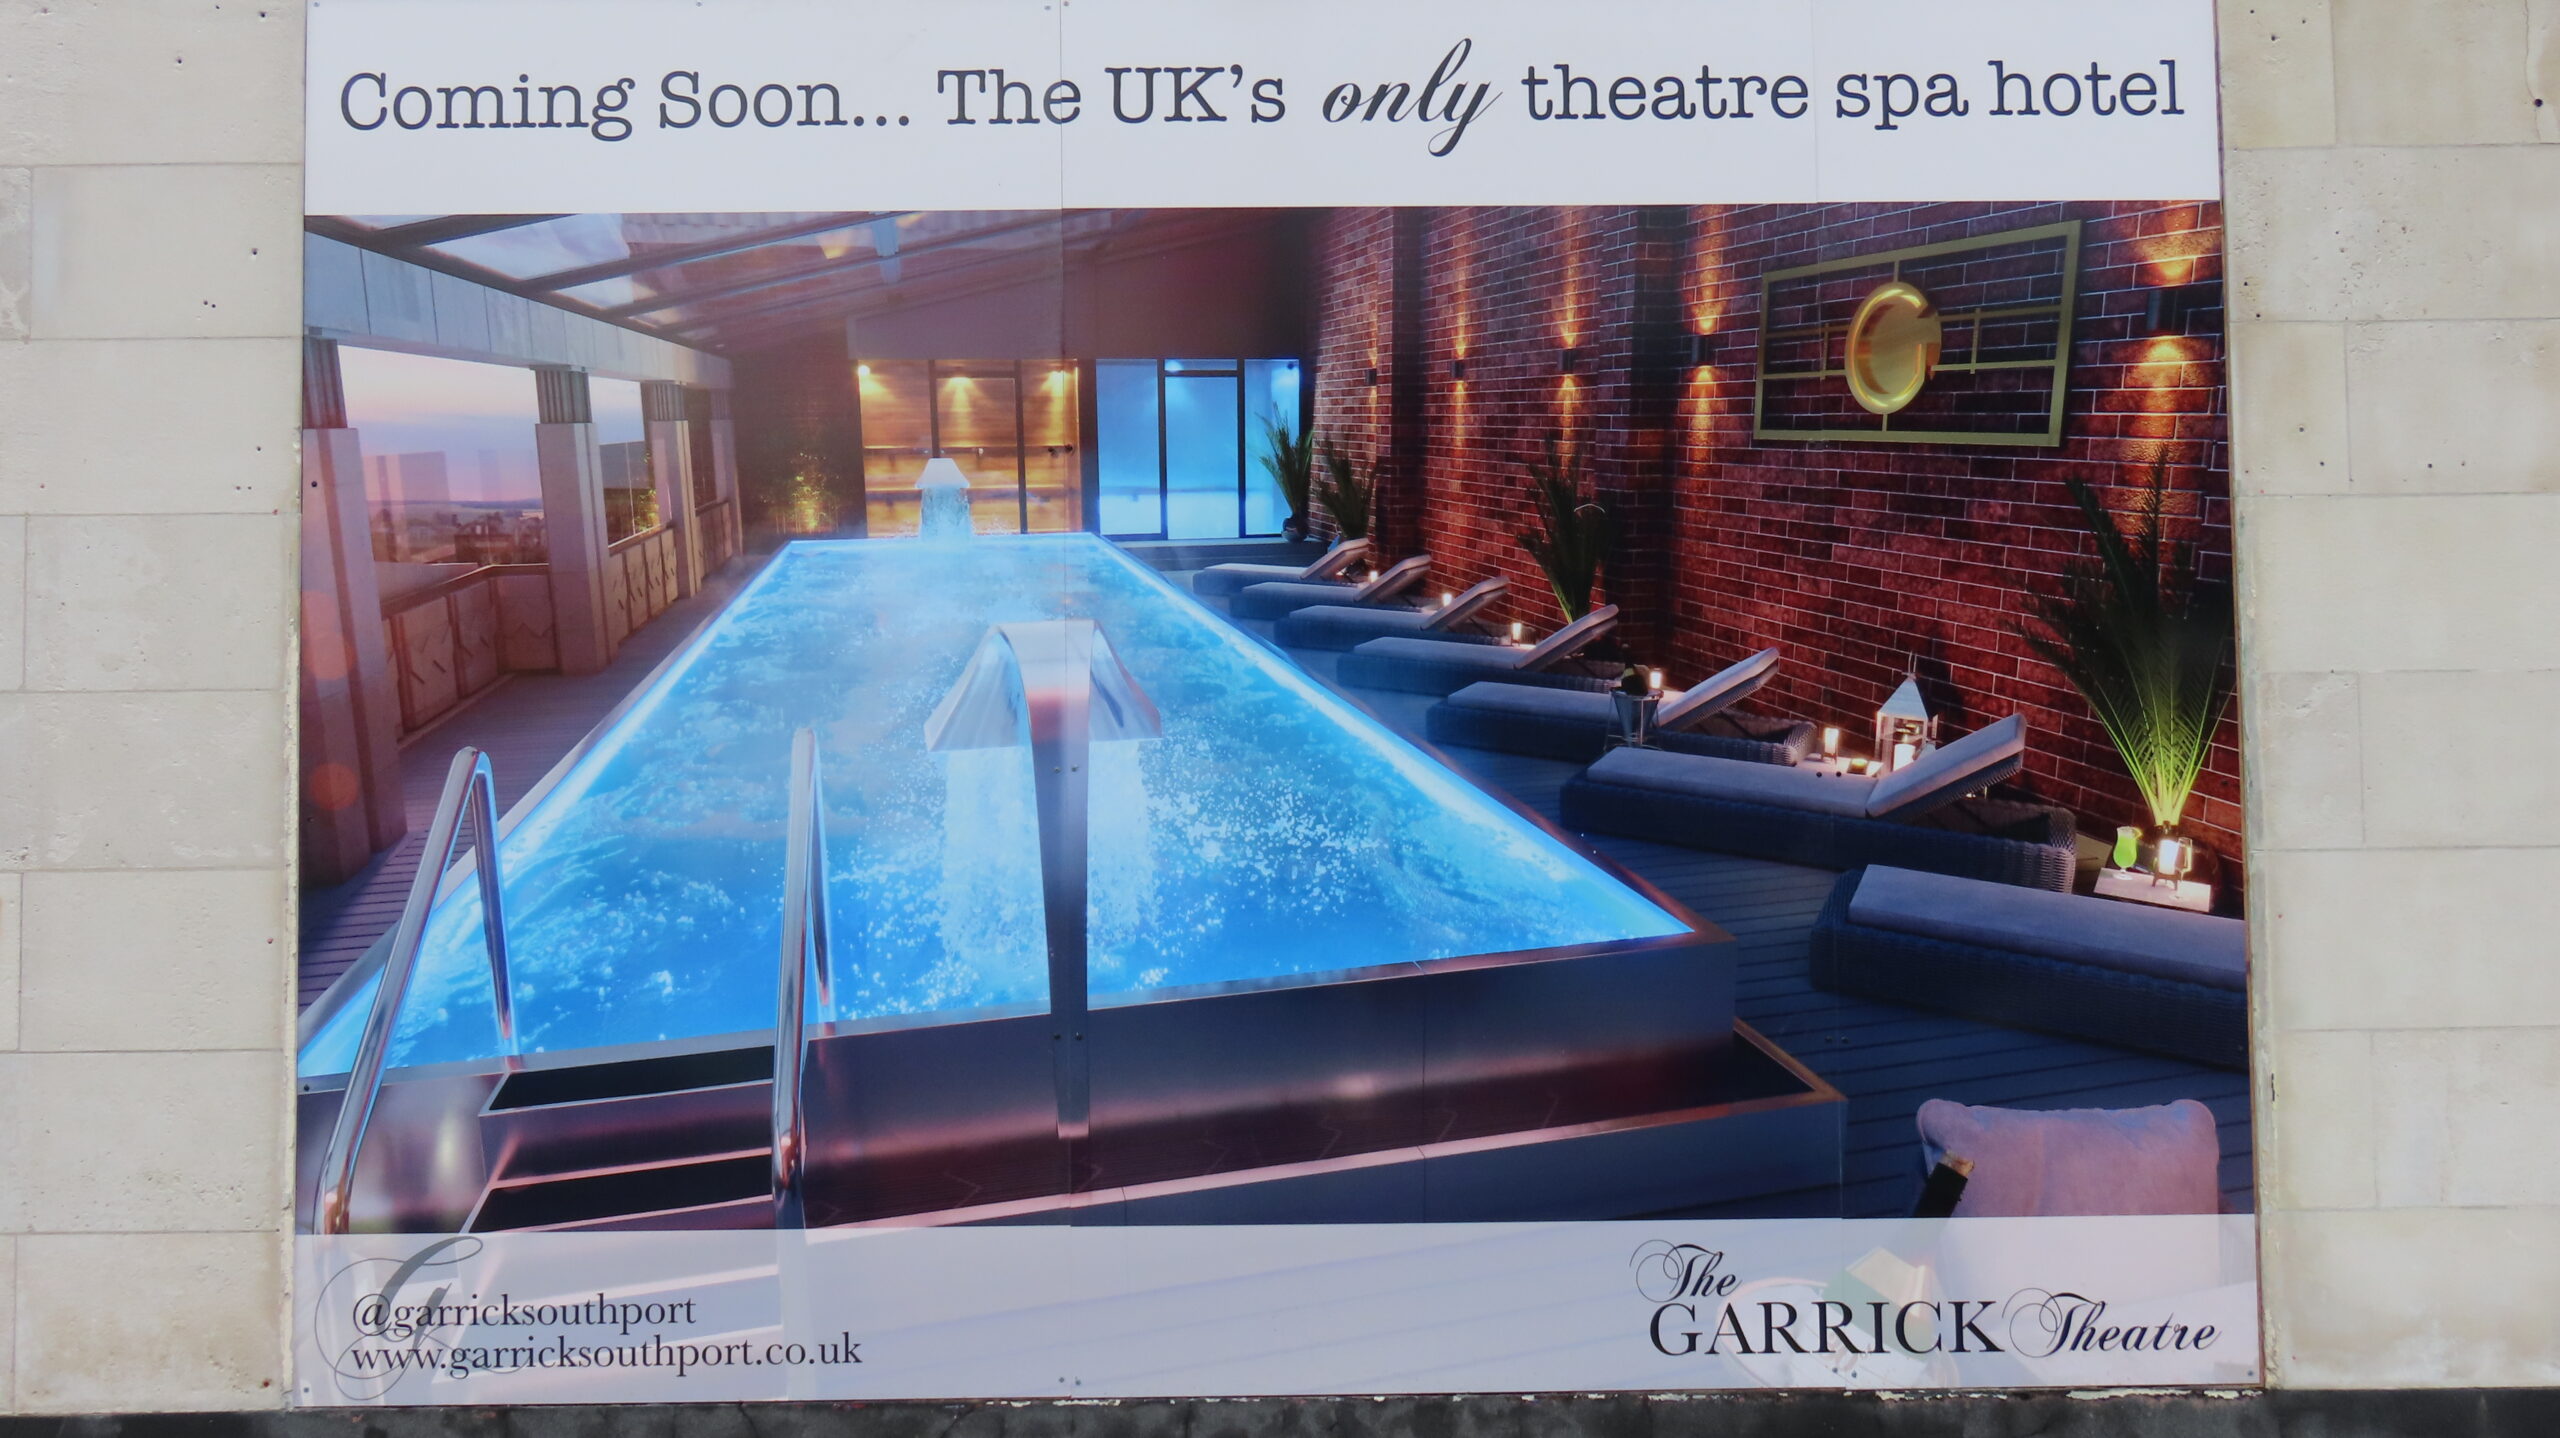 Promotional boards have been installed outside The Garrick building on Lord Street in Southport proclaiming the UKs only theatre spa hotel